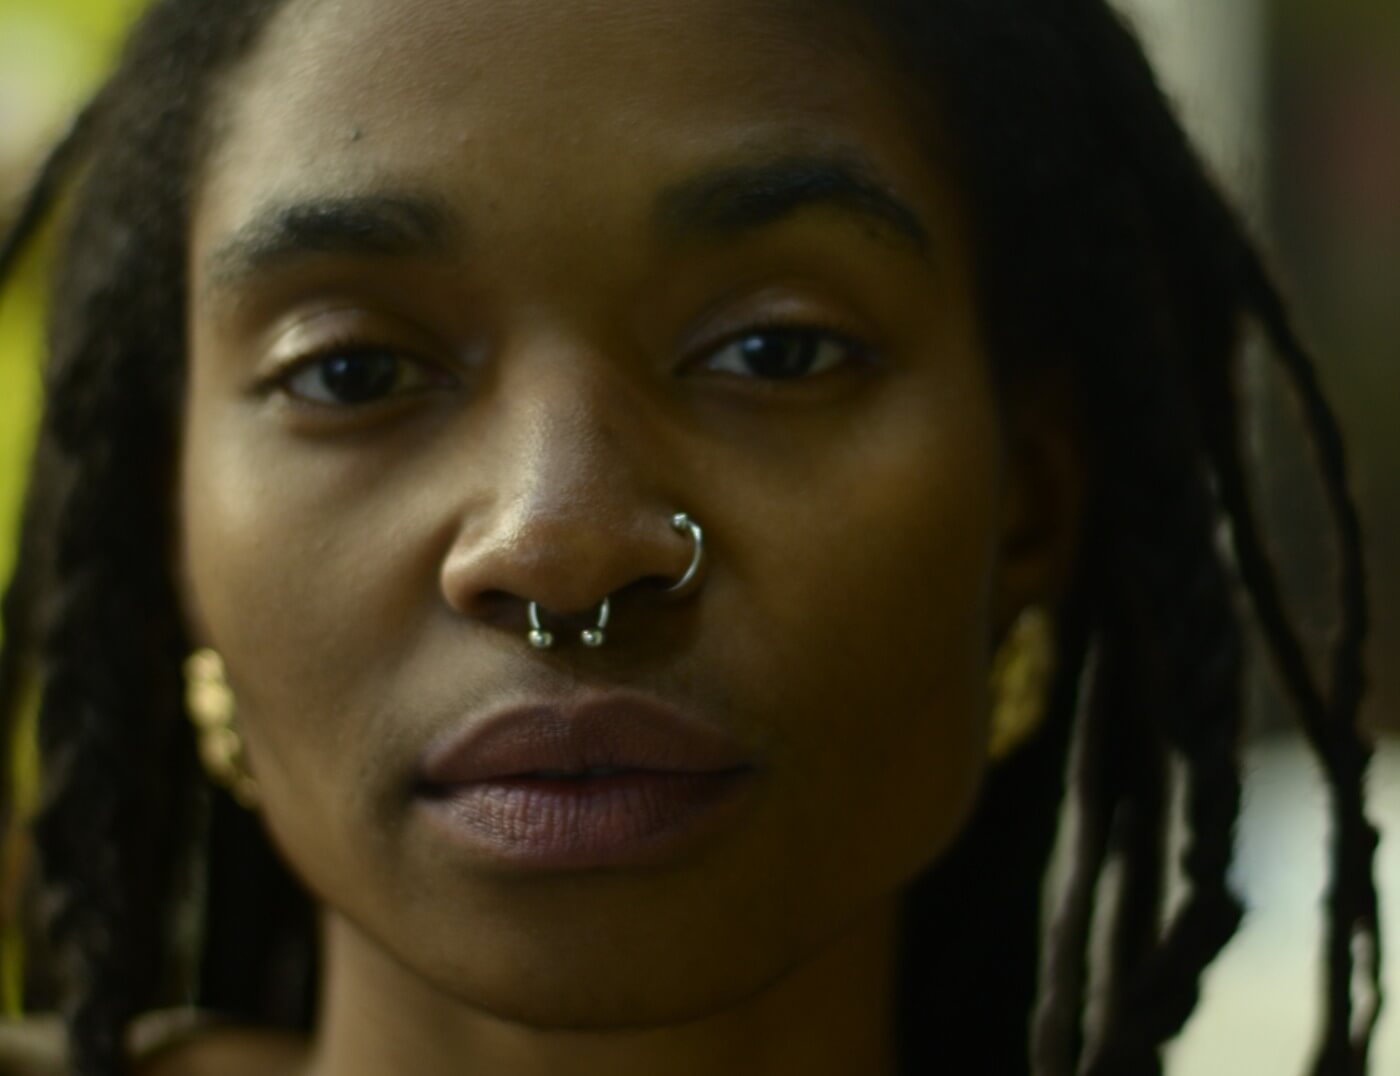 Septum and nose hoop piercing done by Mo8 at Iron Palm Tattoos & Body Piercing in downtown Atlanta's Castleberry Hill art district. Jewelry is included with the piercing service. Call 404-973-7828 or stop by for a free consultation with an Iron Palm body piercer.